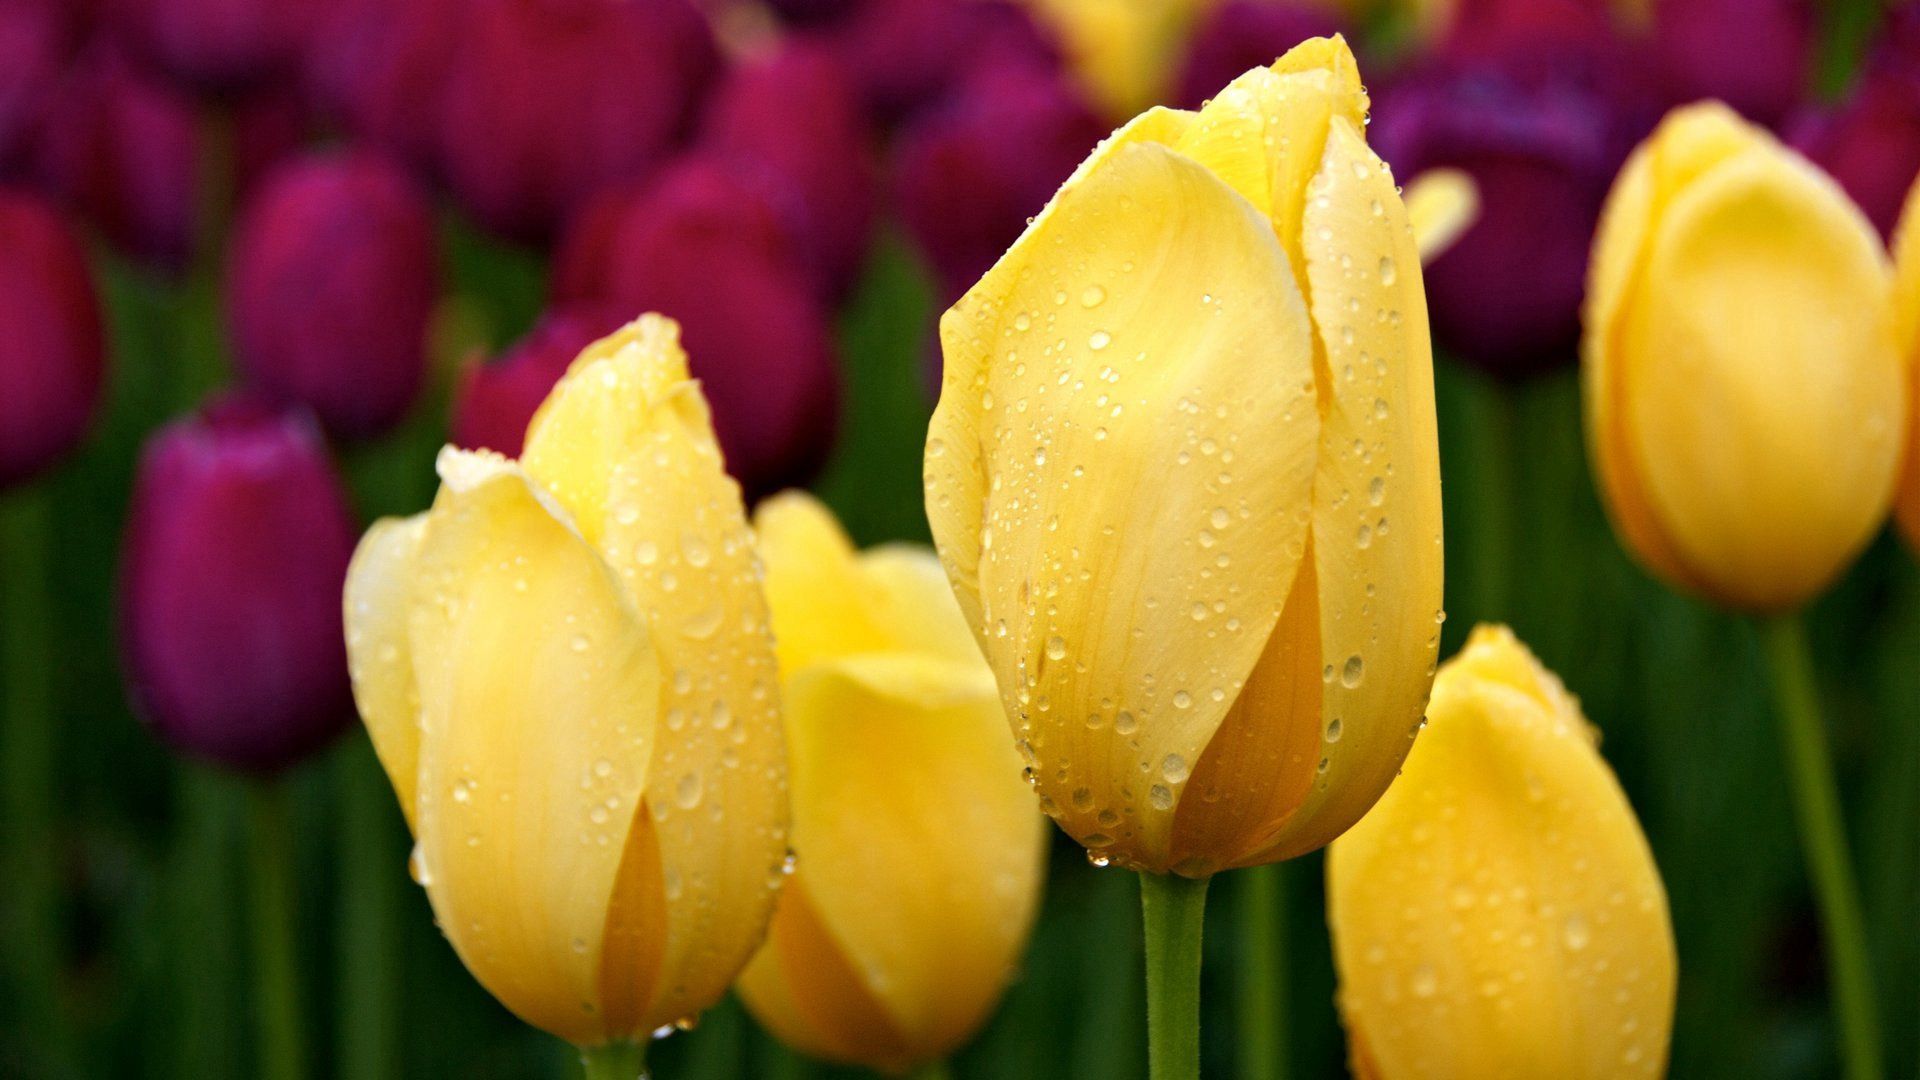 Cool Wallpapers drops, greens, flowers, tulips, buds, different